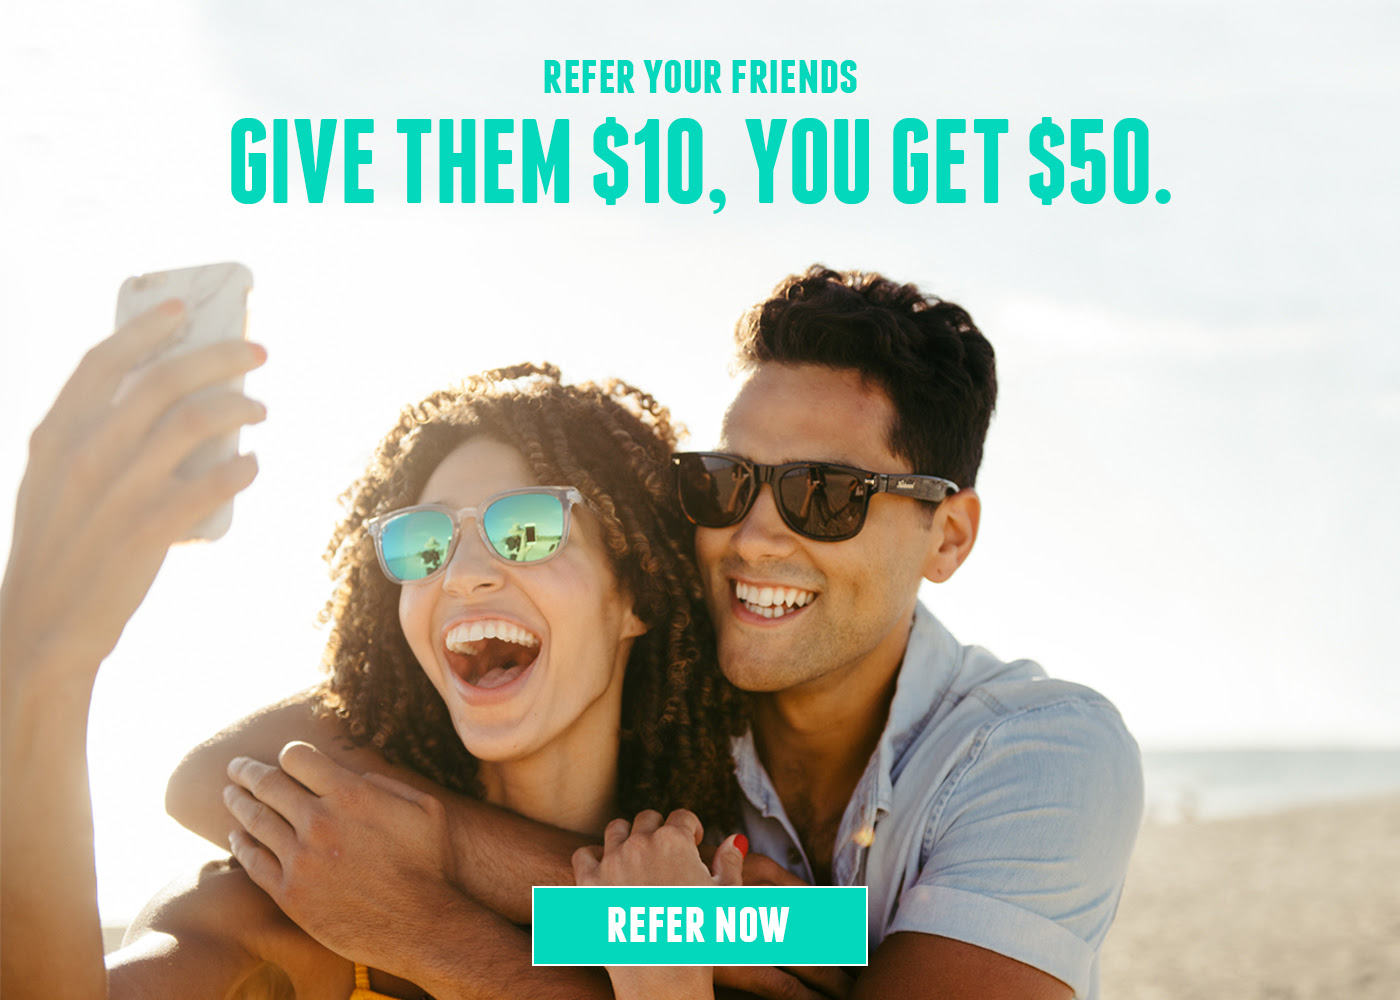 Refer a Friend and get $10